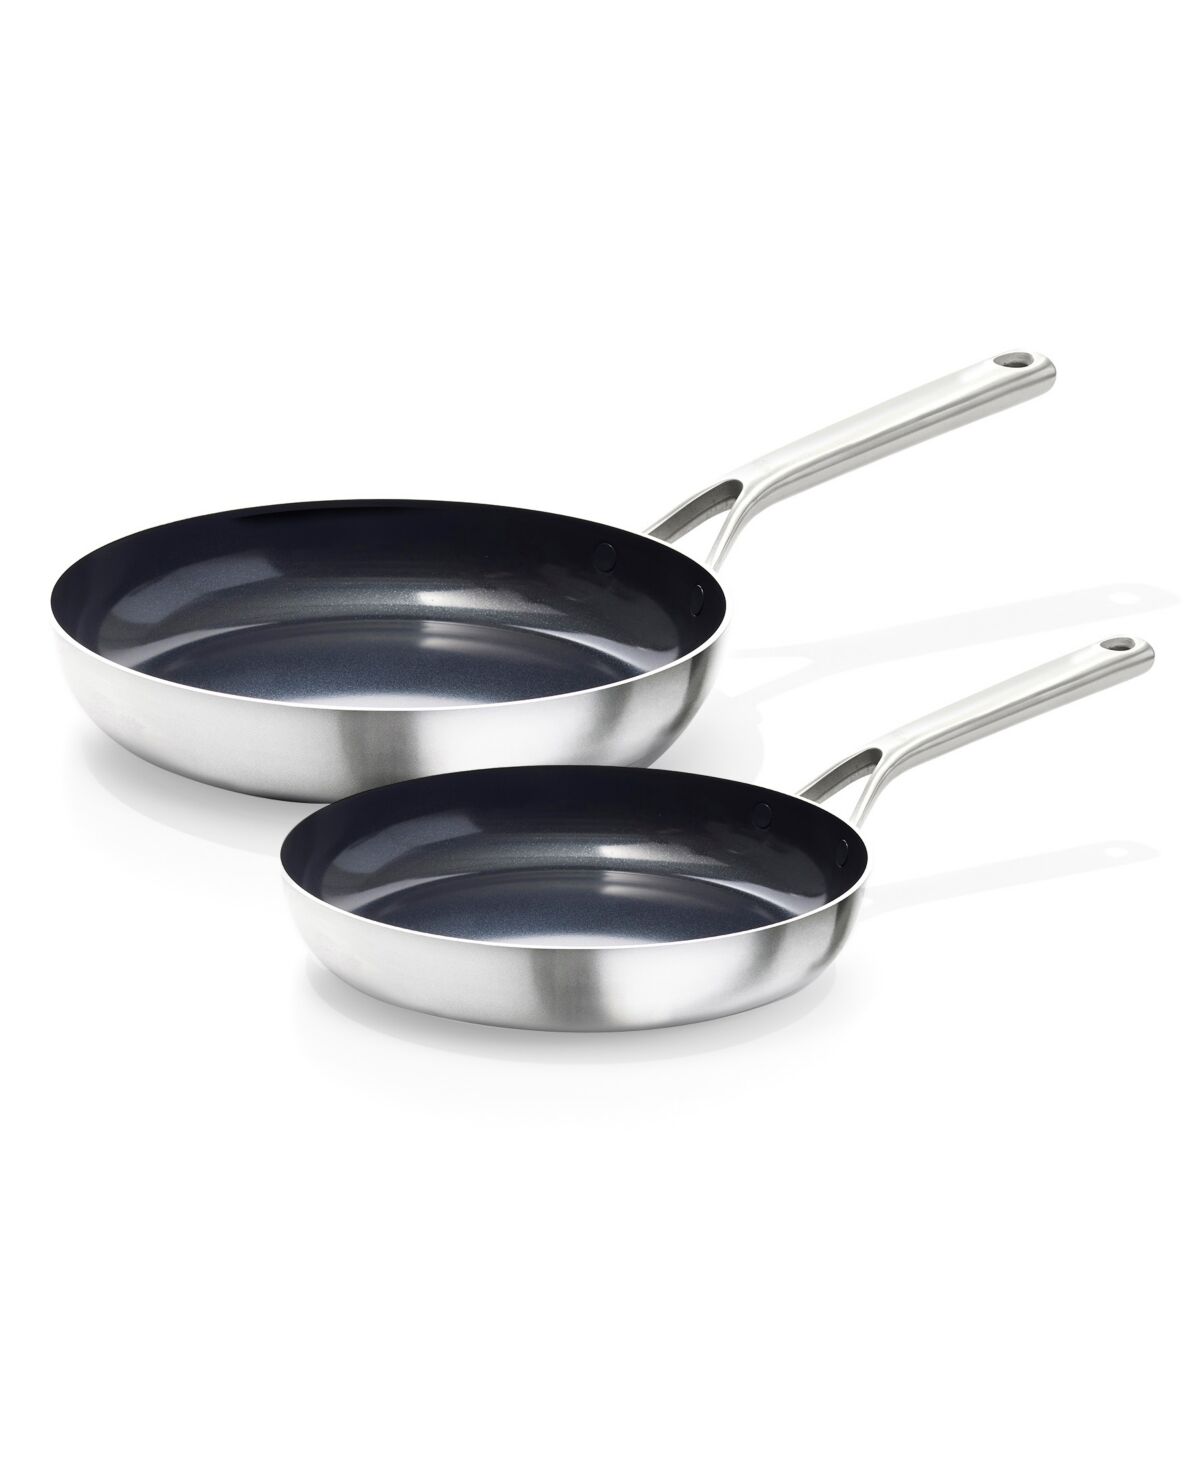 Oxo Mira Tri-Ply Stainless Steel Non-Stick 2 Piece Frying Pan Set - Stainless Steel